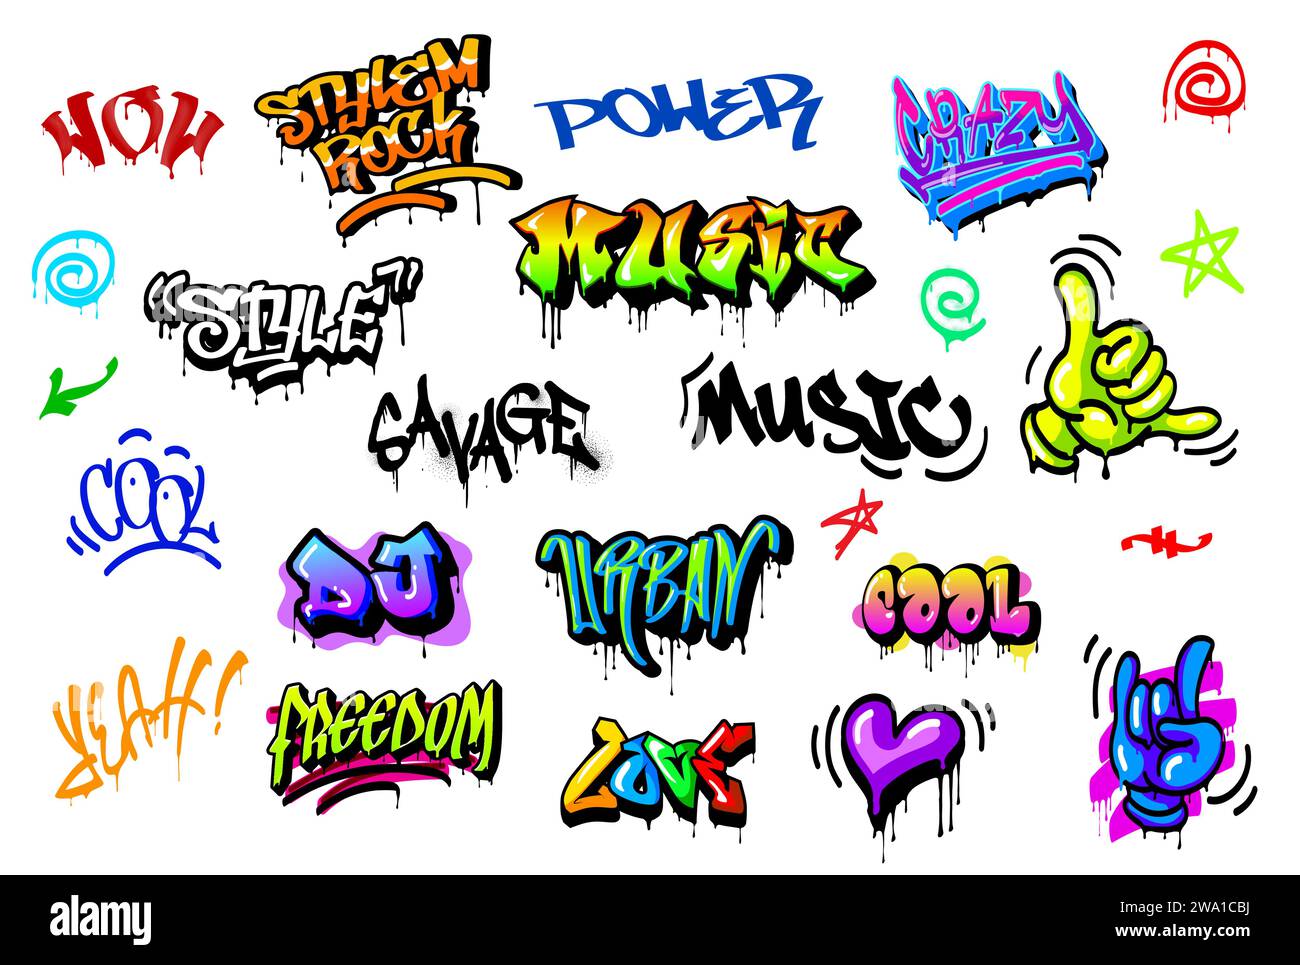 Graffiti street art, urban style wall writings, tags and drawings. Grunge graffiti tags set of cool, love, dj and yeah, freedom, music and crazy, spray paint stars, arrows, rock and shaka hand signs Stock Vector